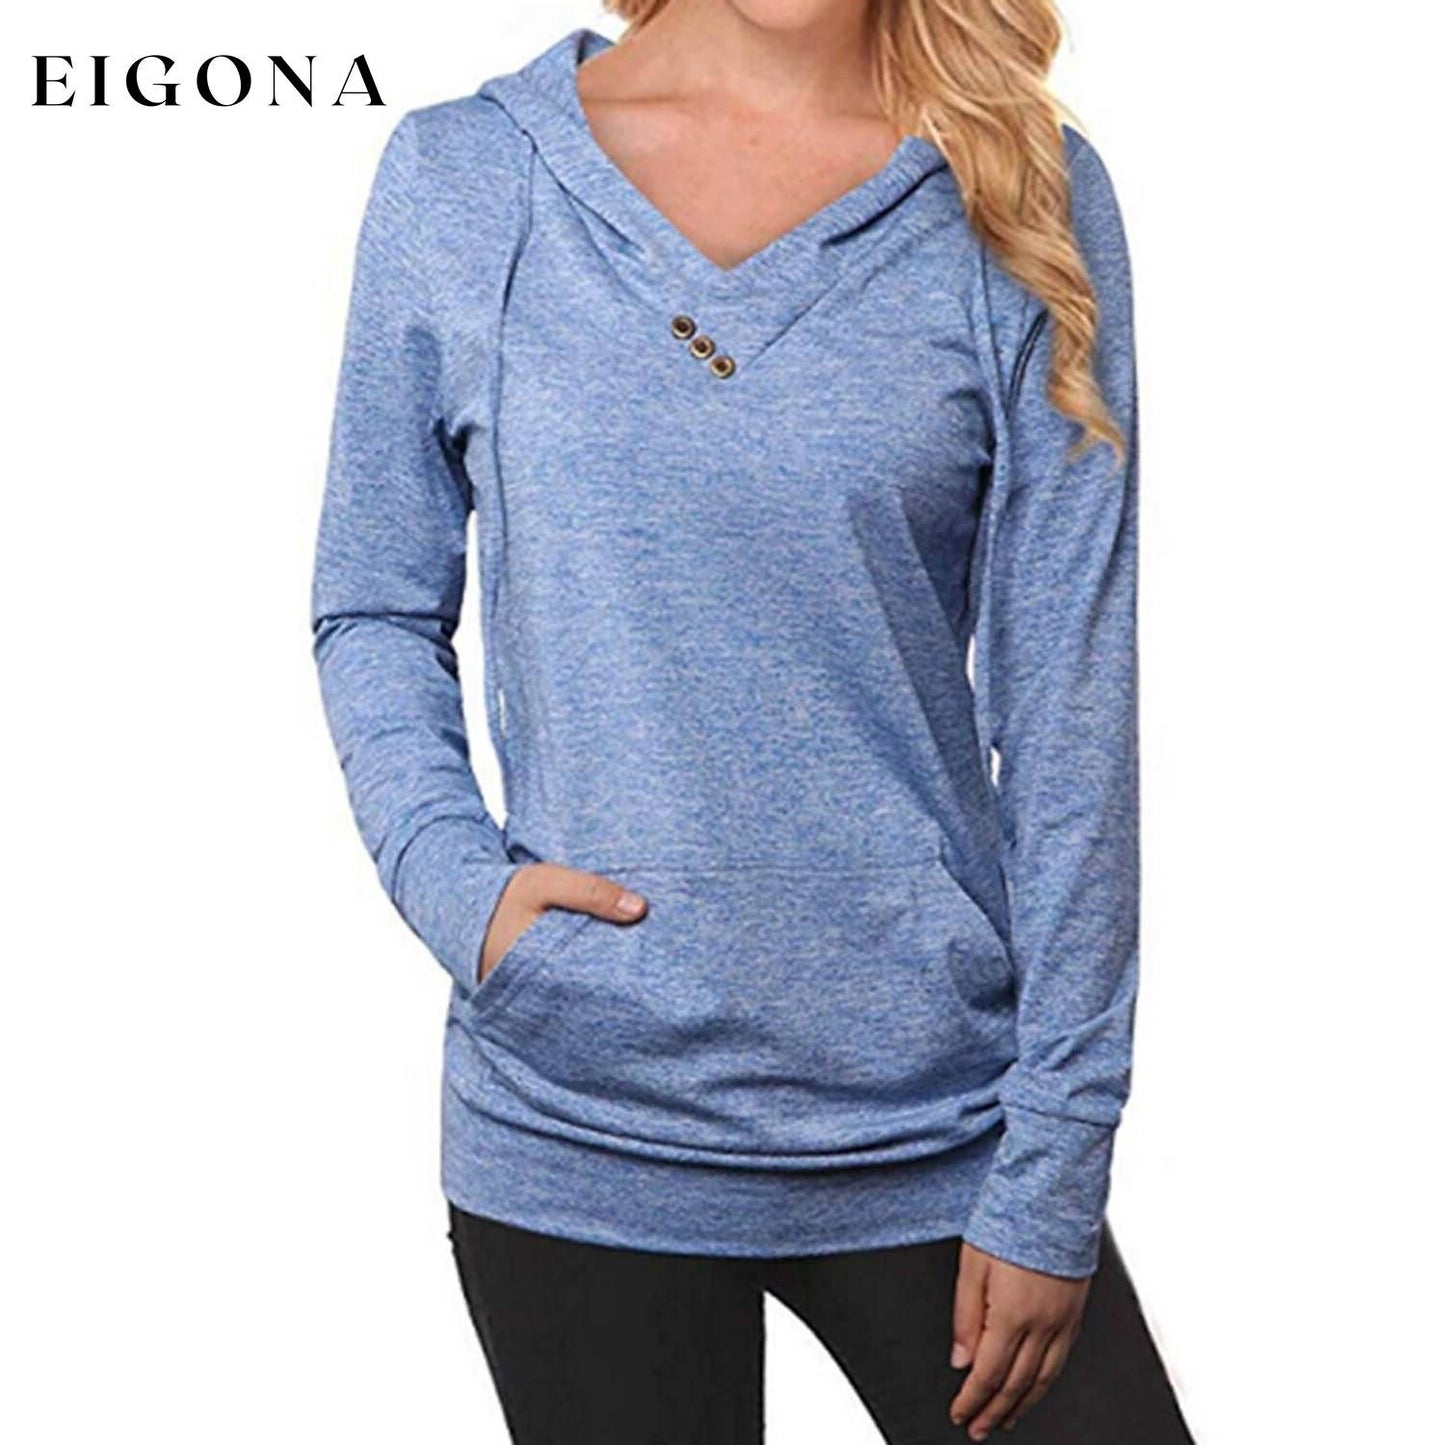 Women's Hoodie Sweatshirt Plain Lace Up Front Pocket Blue __stock:200 clothes refund_fee:800 tops